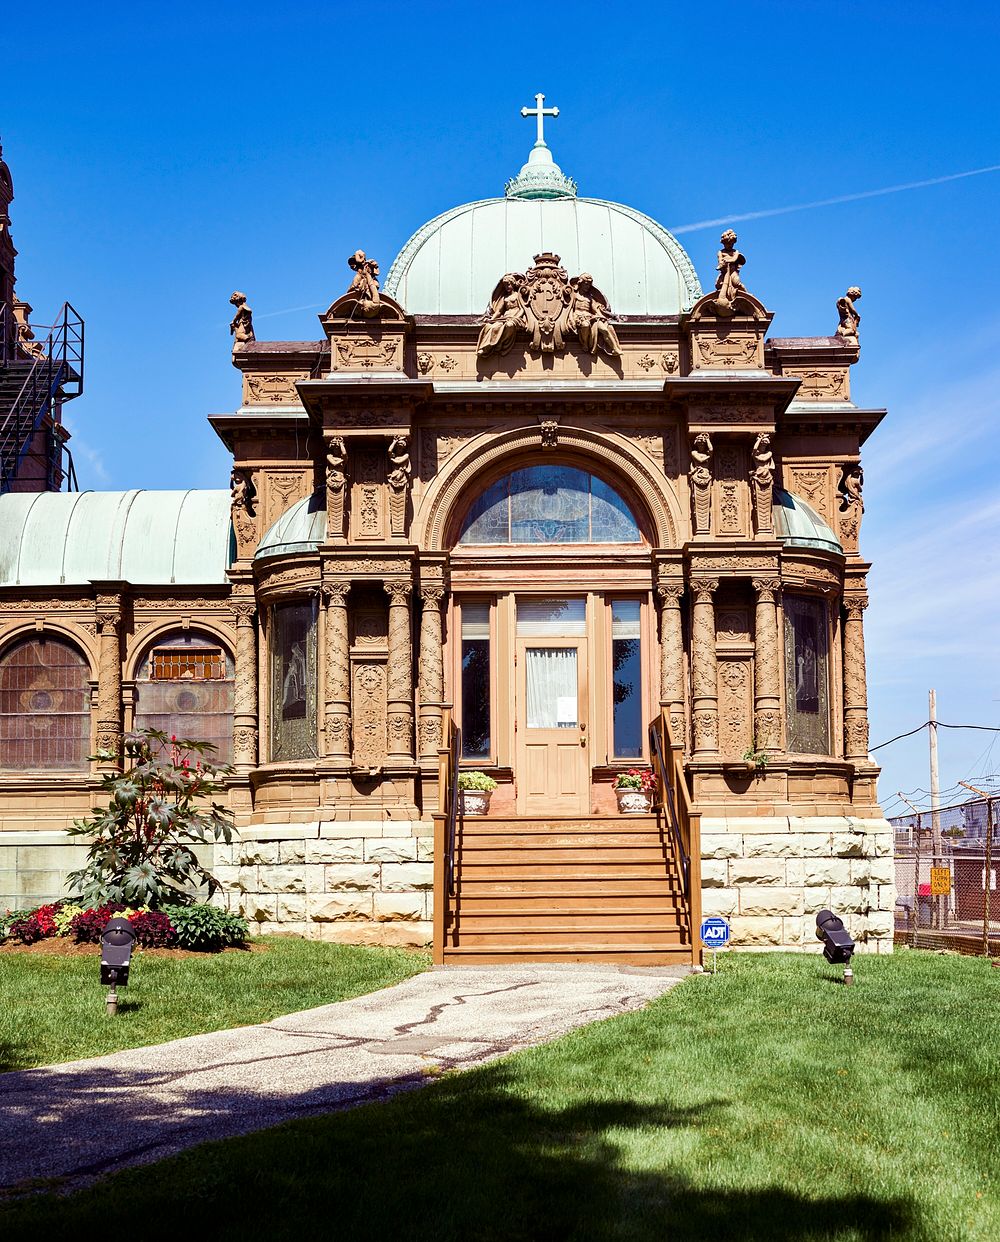 Pabst Mansion in Milwaukee, Wisconsin. Original image from Carol M. Highsmith&rsquo;s America, Library of Congress…